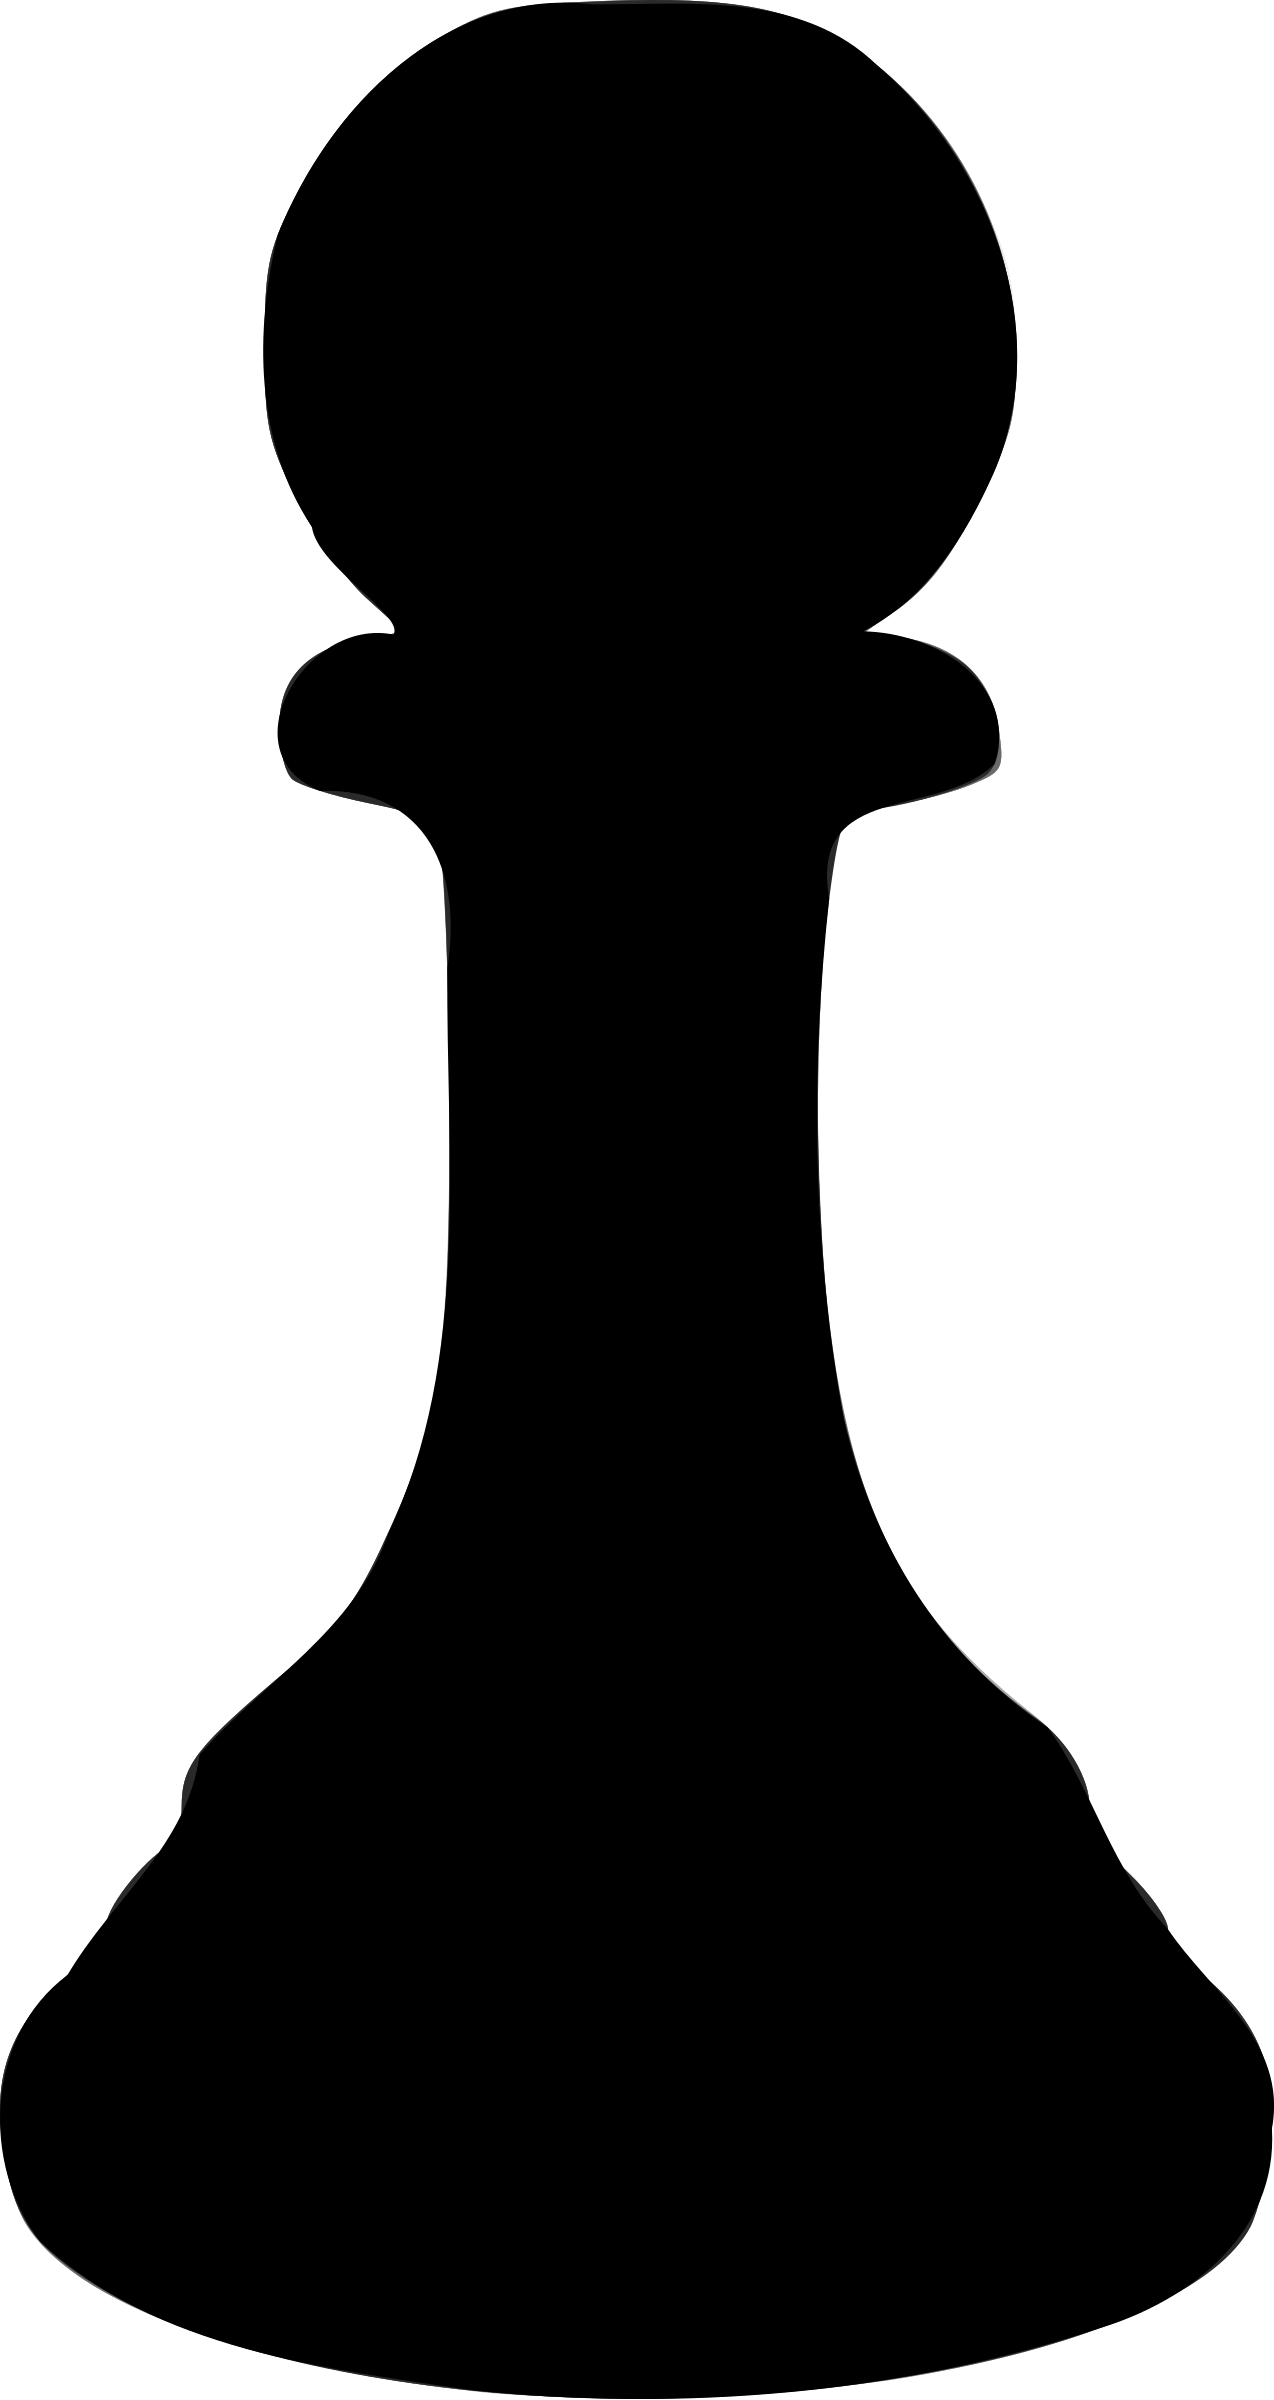 Silhouette of a pawn chess piece Royalty Free Vector Image